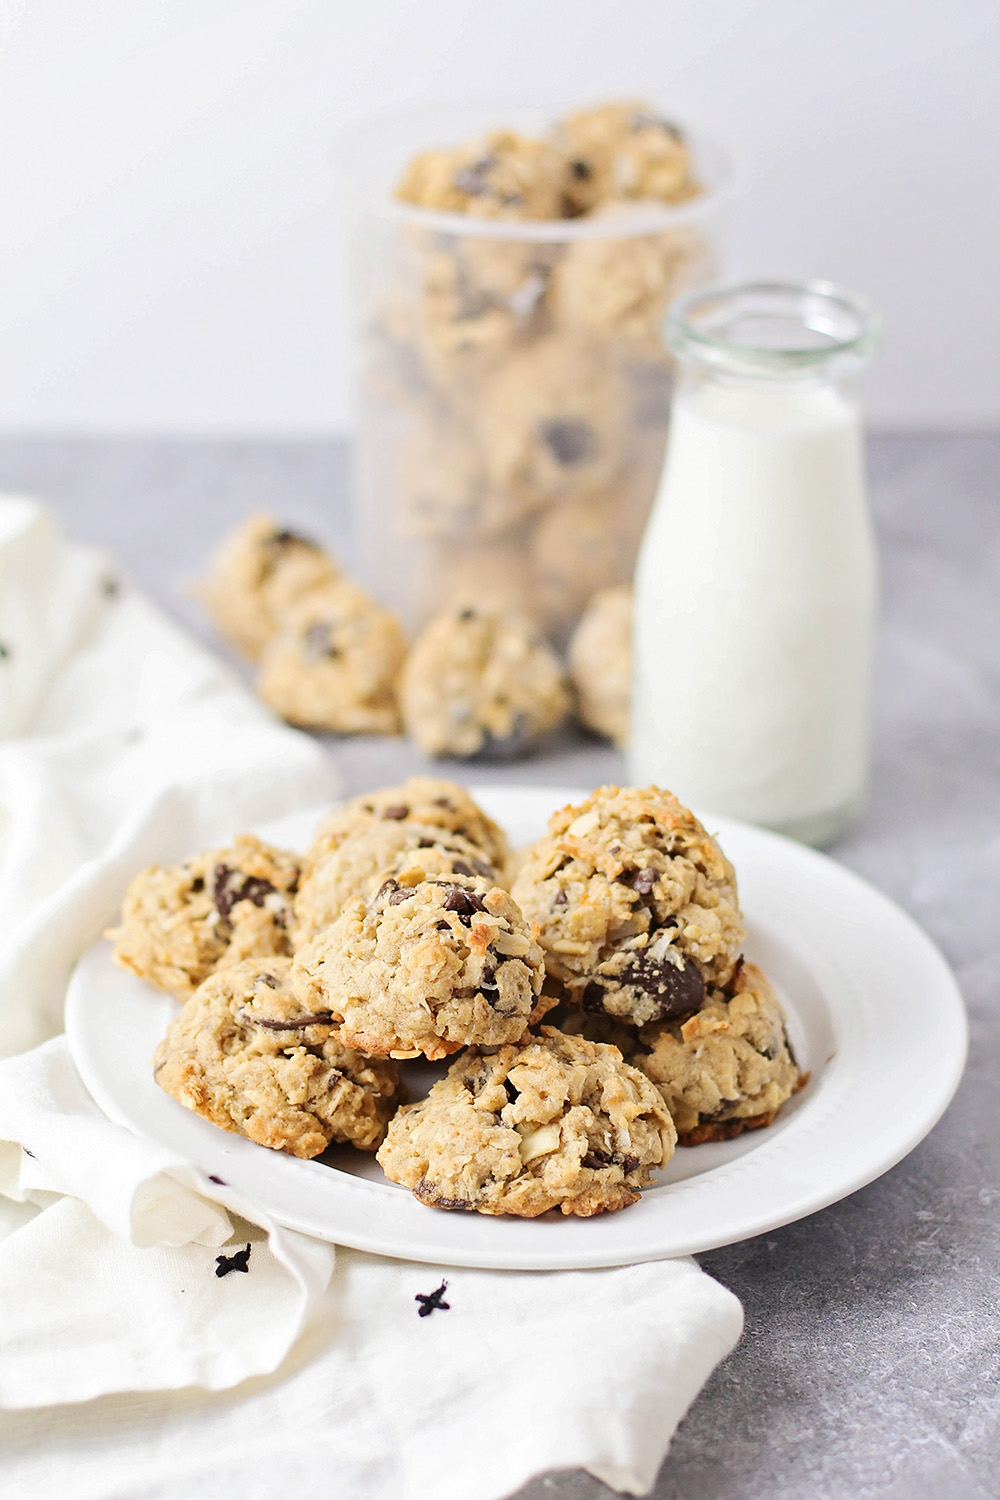 These lactation cookies taste absolutely delicious, and are great for boosting milk supply! They're totally addicting.